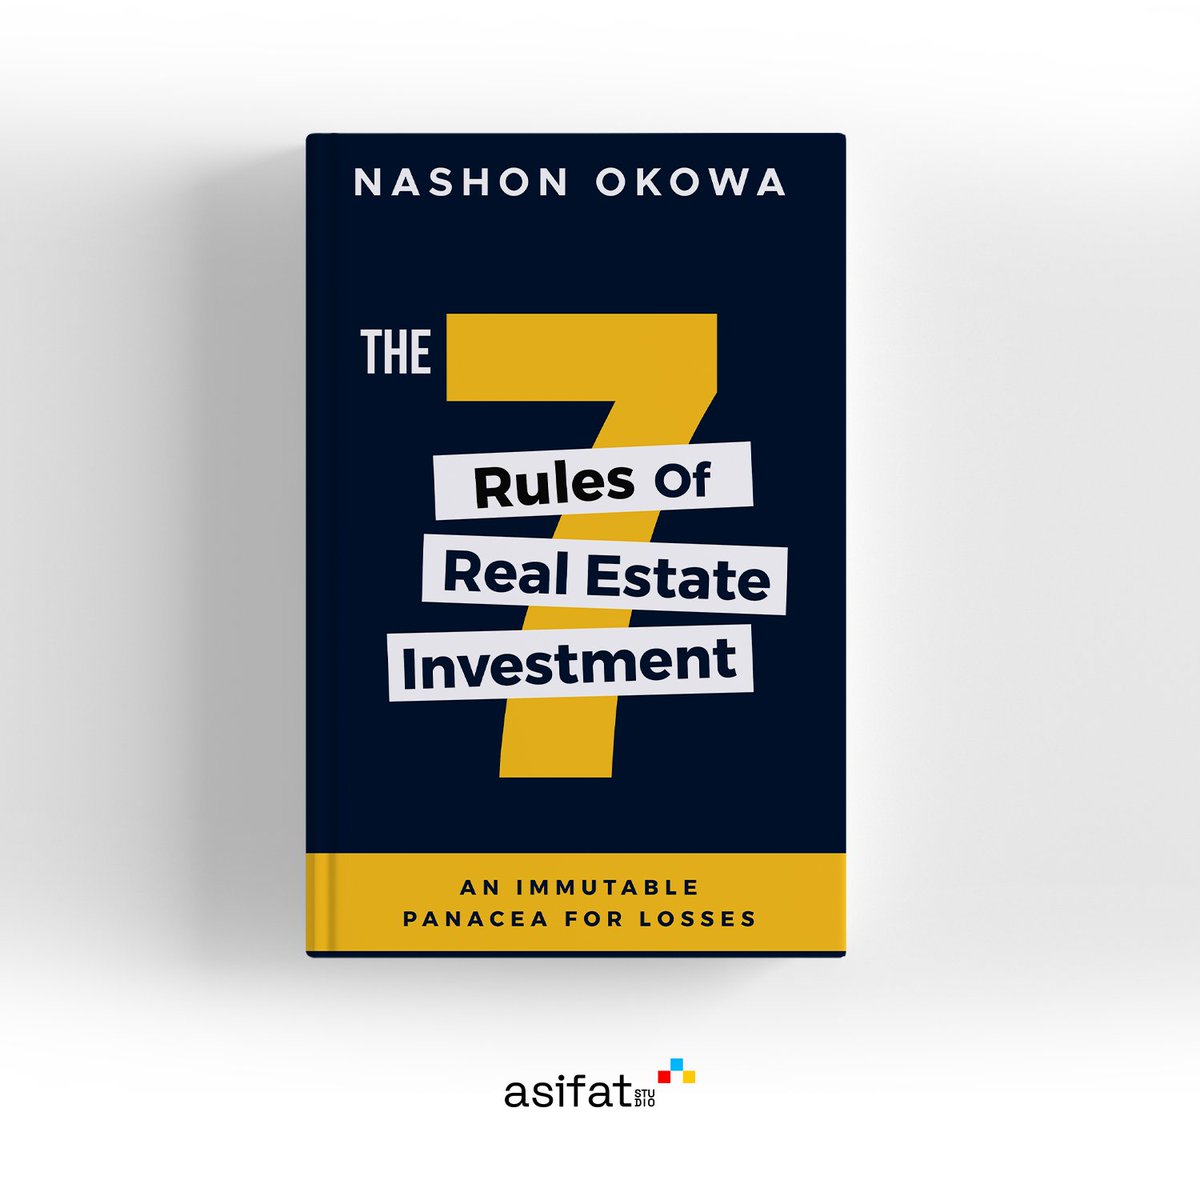 The 7 Rules Of Real Estate Investment By Mason Okowa

Design By  Asifat Studio 

@everyone if you have any PROBLEMS uploading your book or related questions please dm for FREE consultation! 

#authors #writers #books #booklover #bookworm #authorlife #amwriting #WritingCommunity